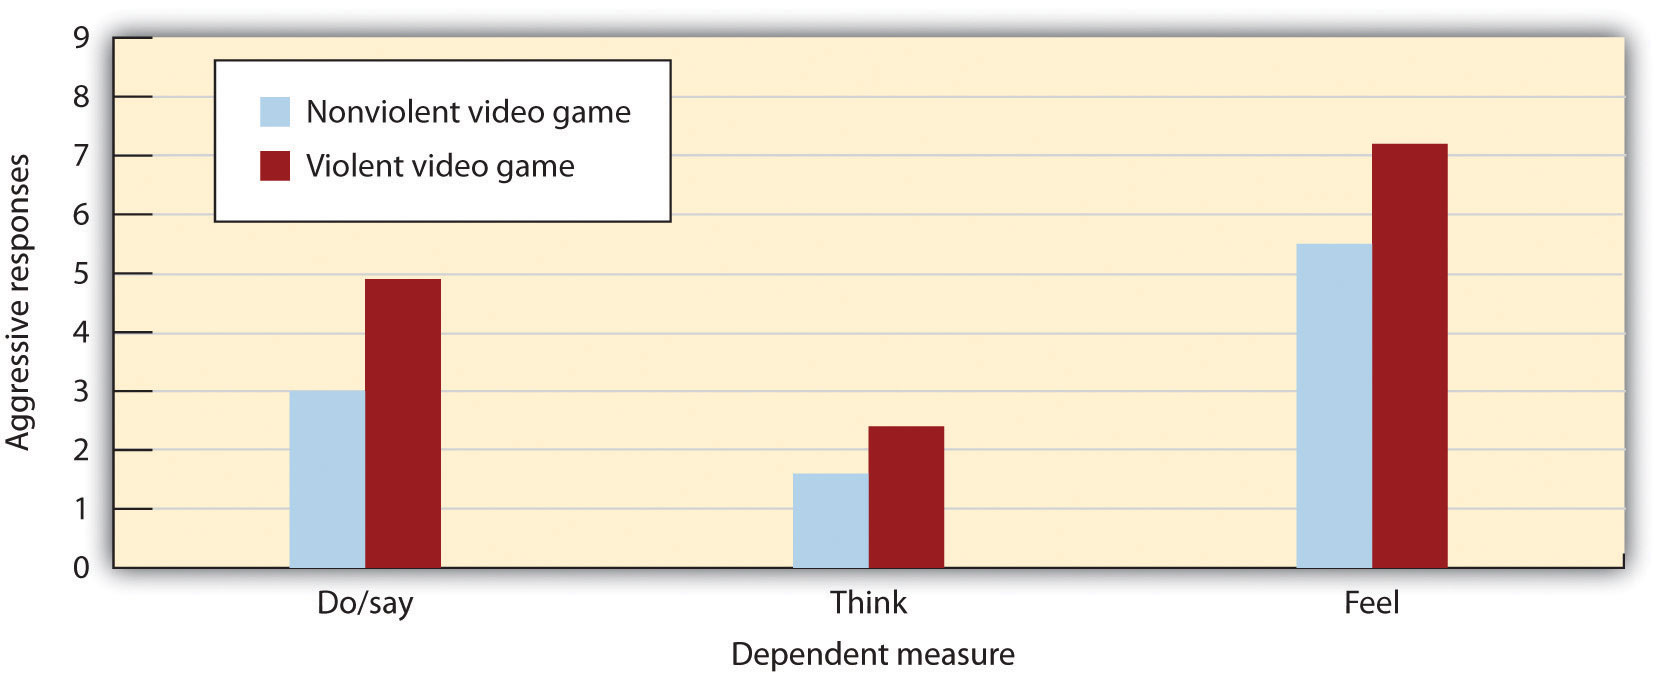 Participants who had recently played a violent video game expressed significantly more violent responses to a story than did those who had recently played a nonviolent video game.